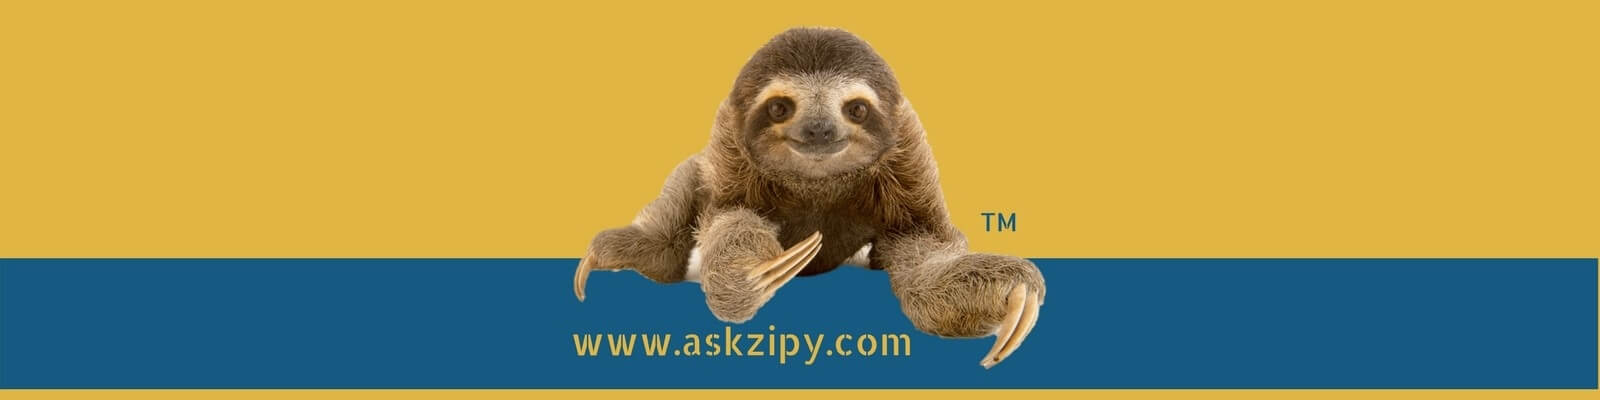 New Features on Ask Zipy